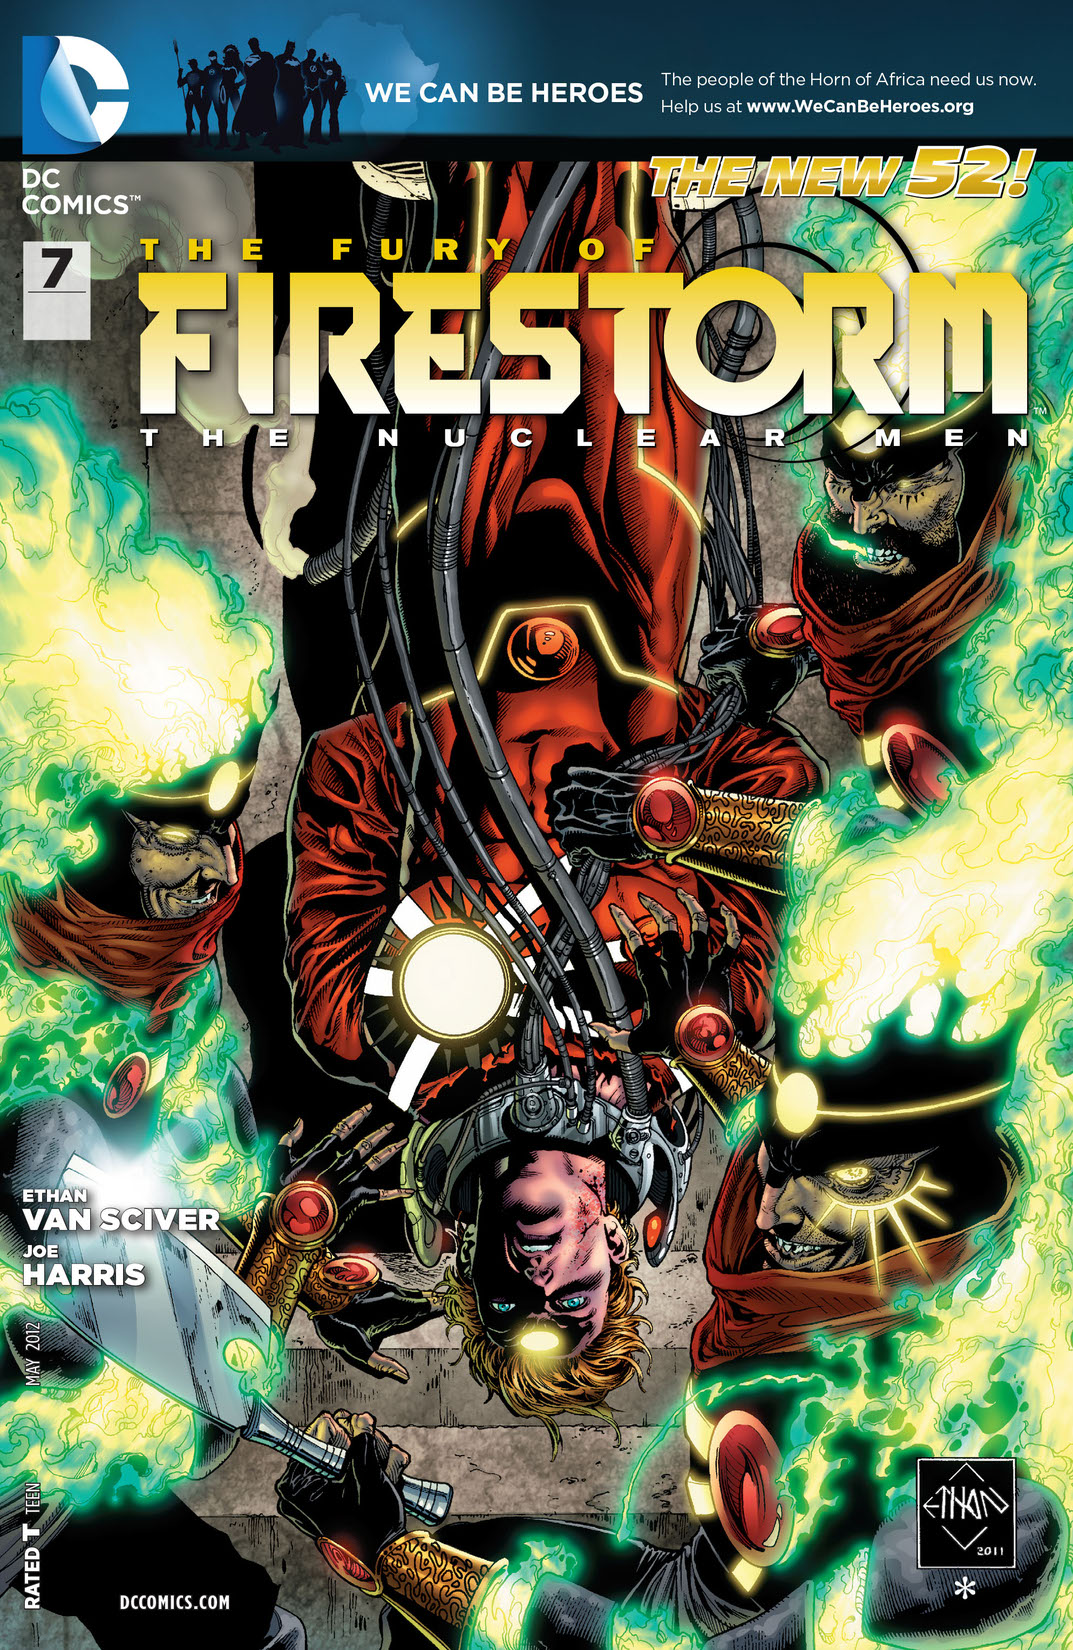 The Fury of Firestorm: The Nuclear Men #7 preview images